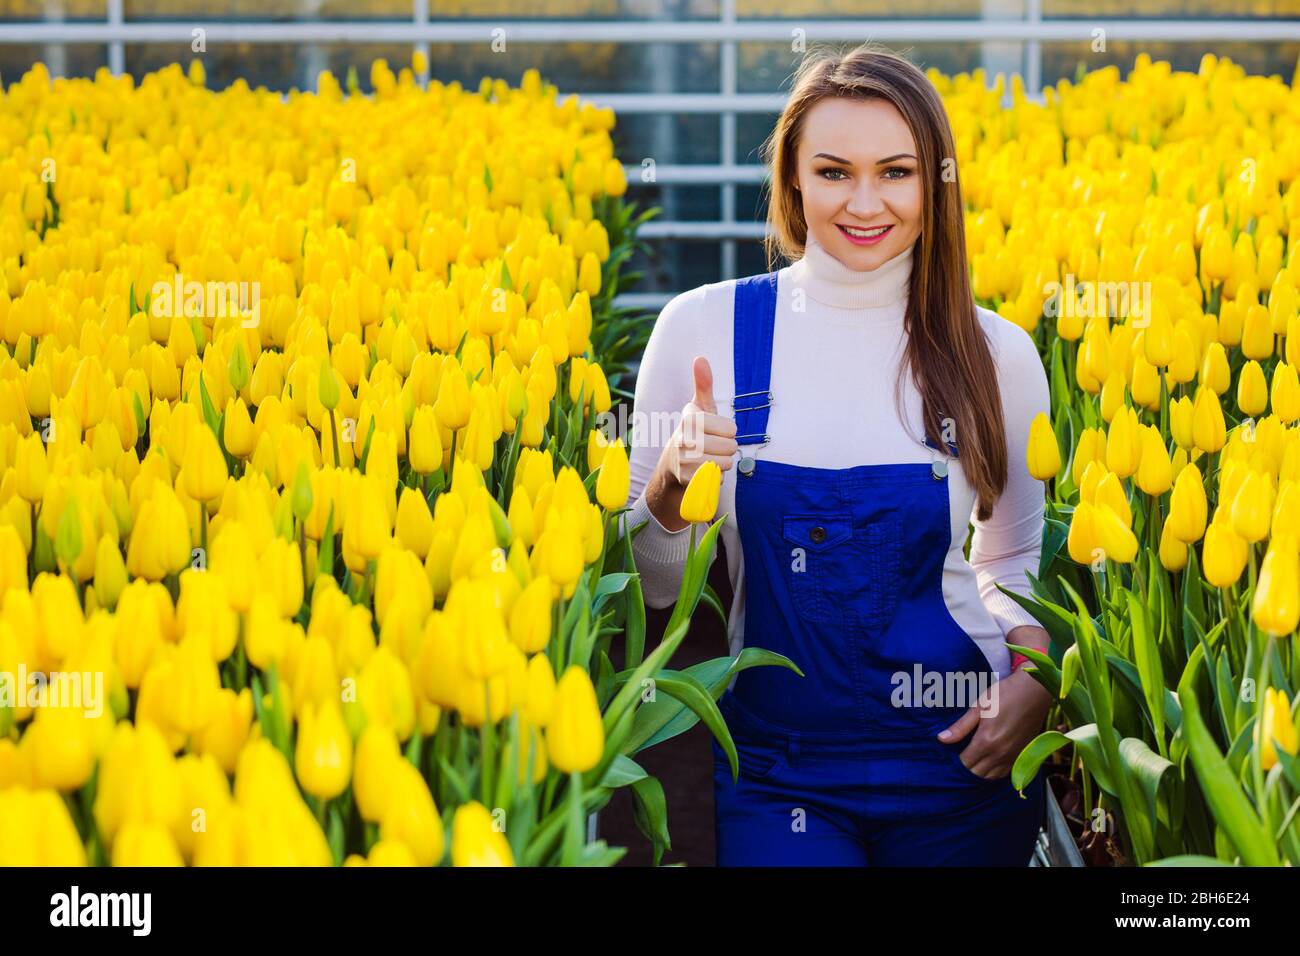 Woman gardener dressed in working uniform, smiling looking at camera, standing in big greenhouse. Industrial cultivation of flowers Stock Photo